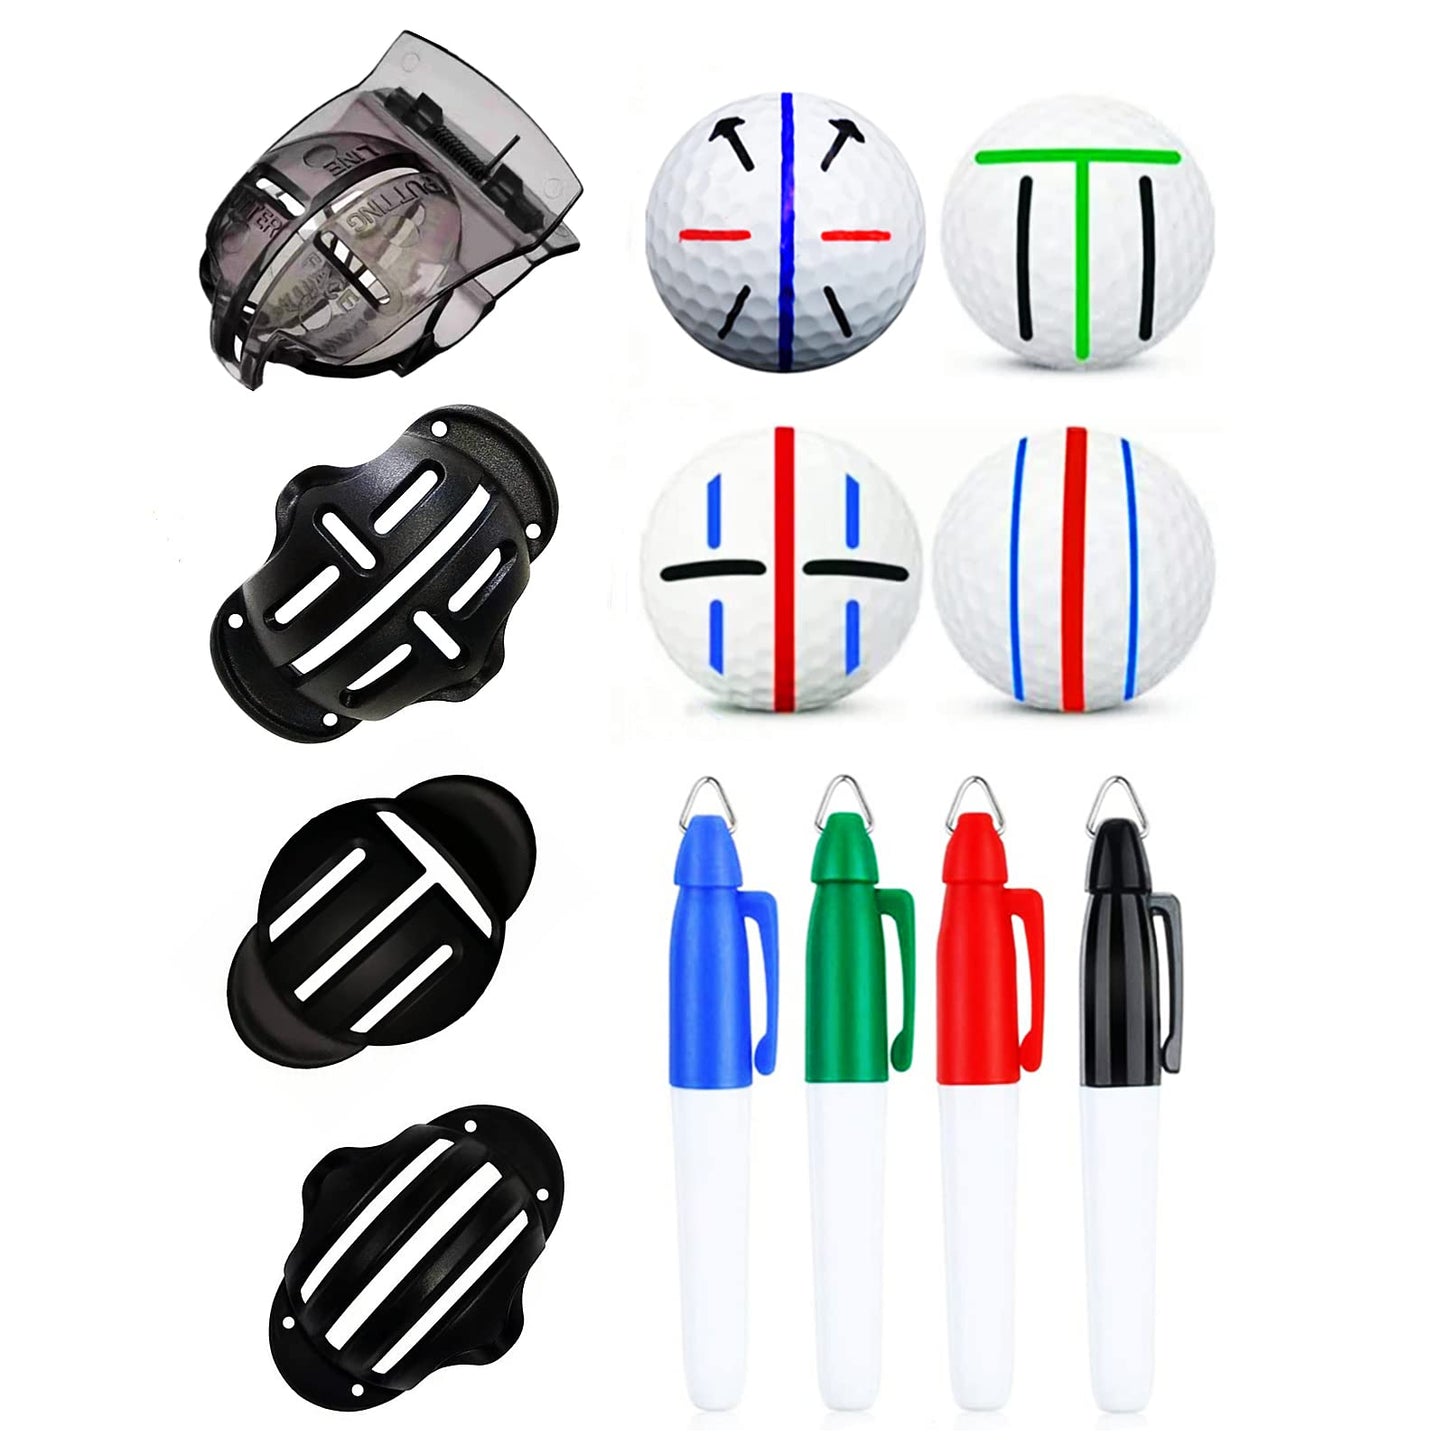 Upgrade Your Putting & Alignment: 8-in-1 Golf Ball Stencil Kit with Markers (Lines & Arrows)